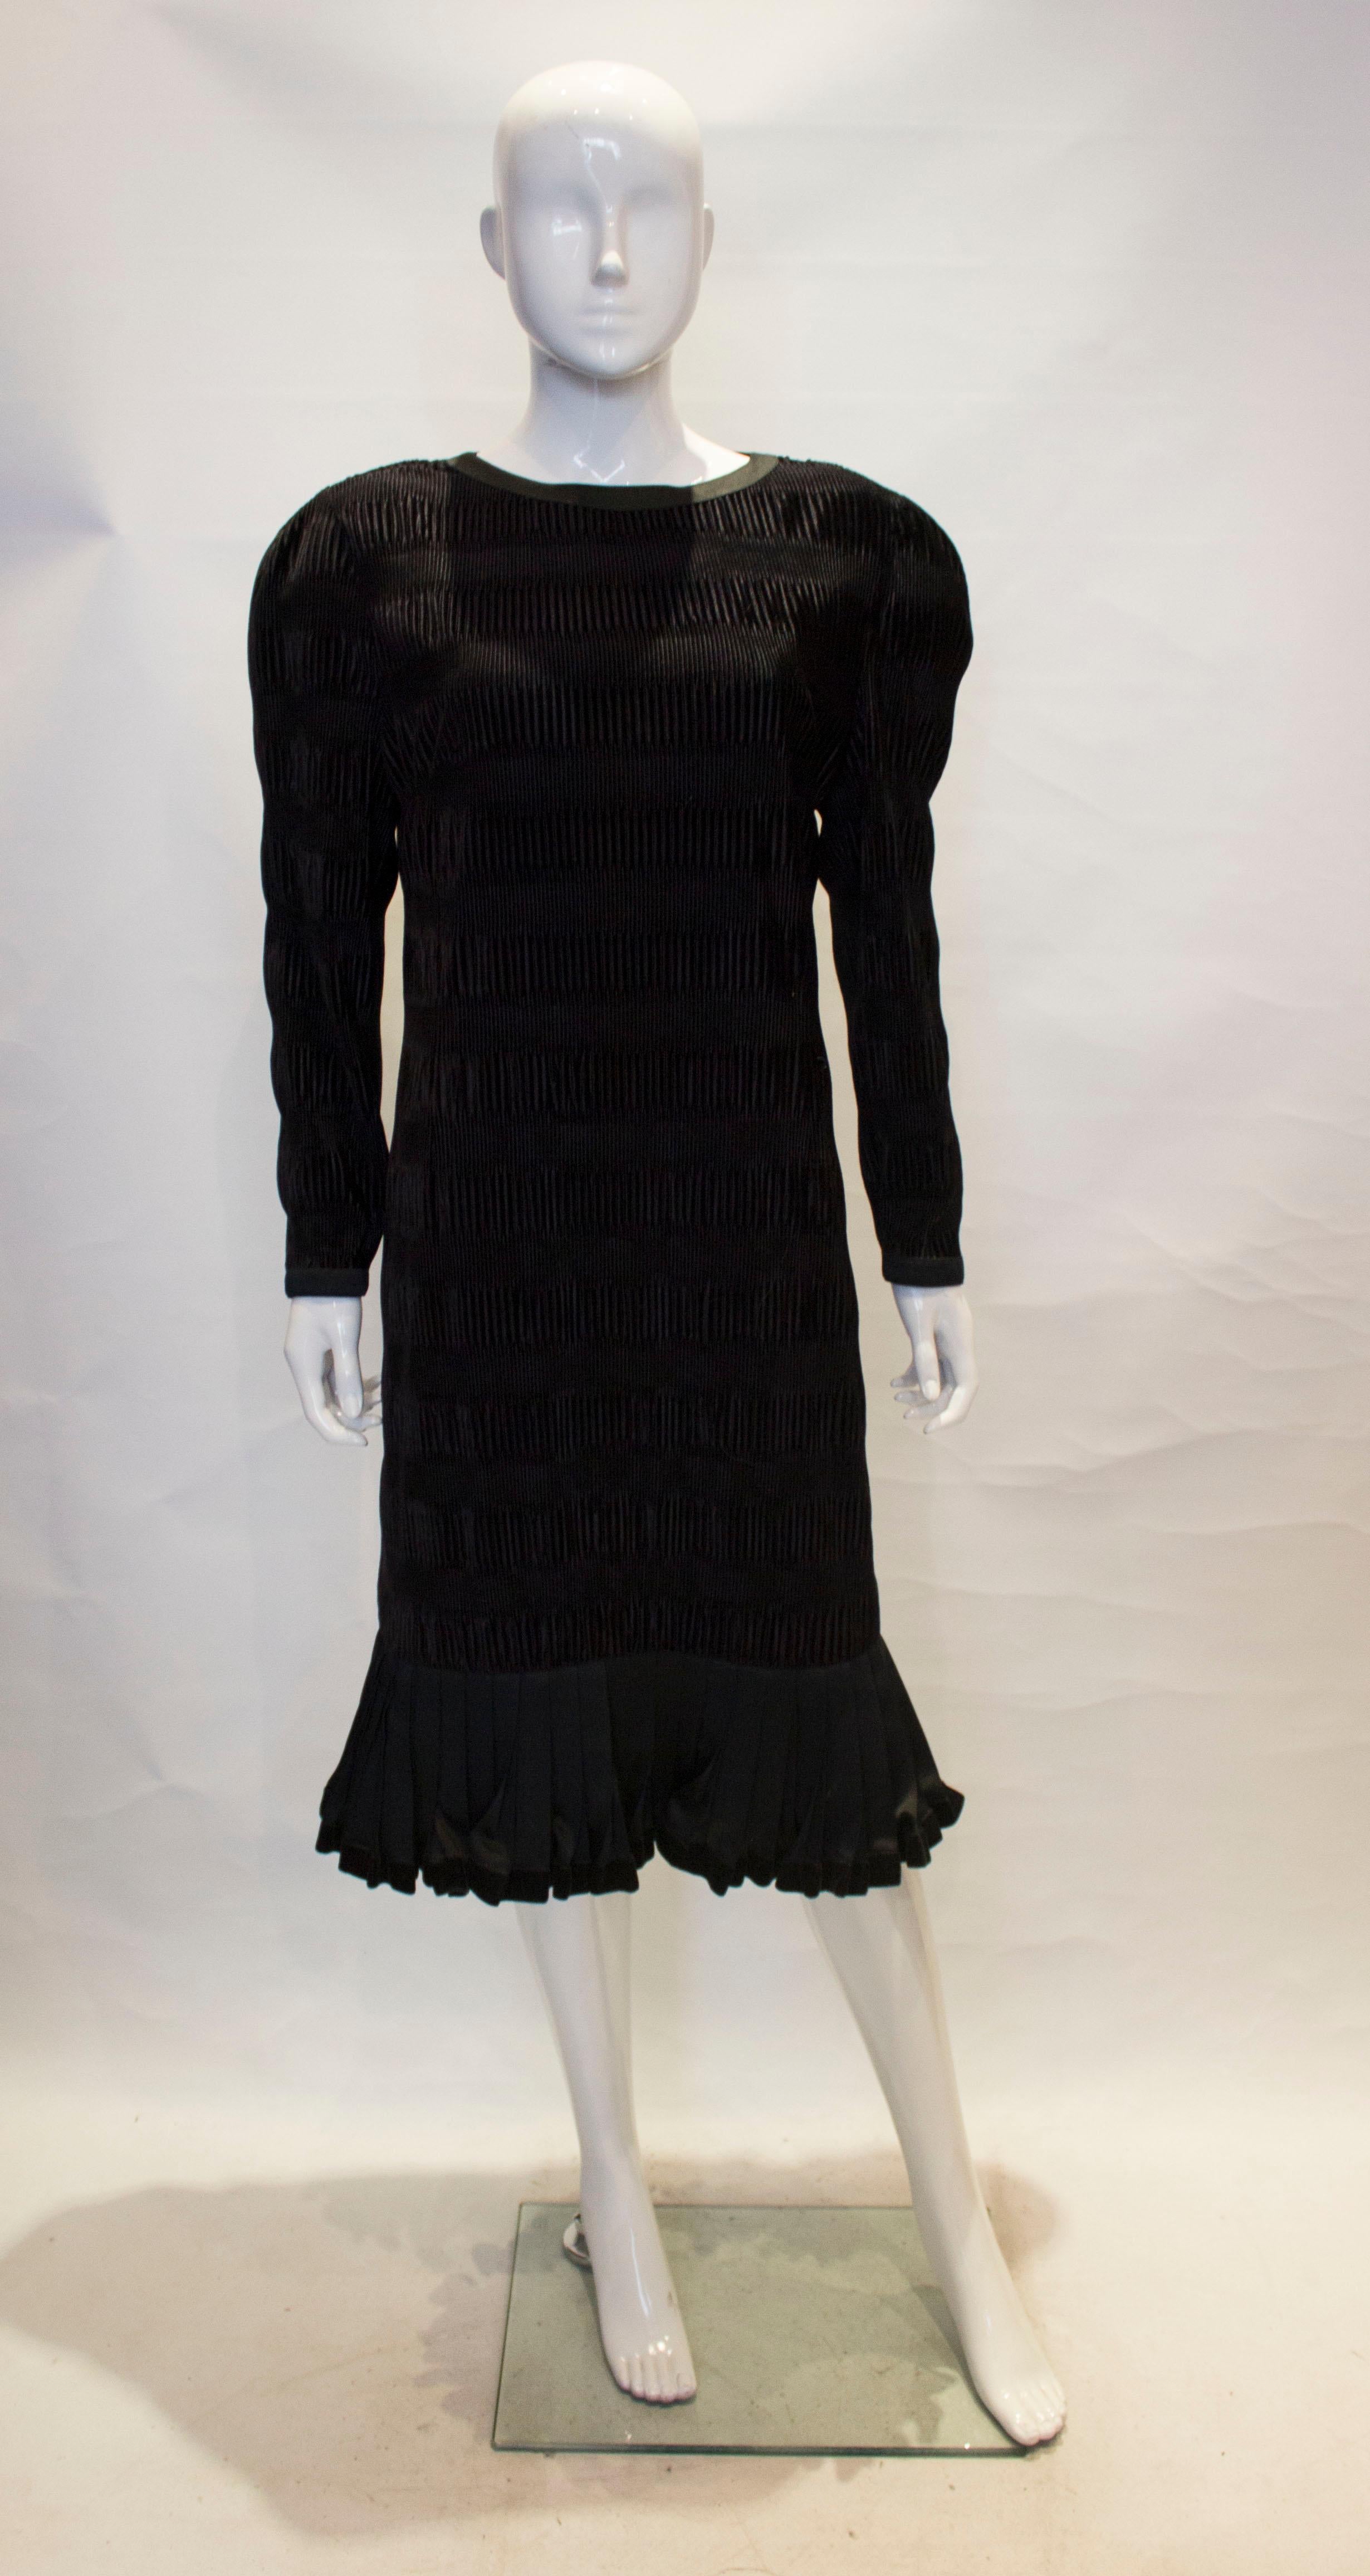 A chic vintage velvet cocktail dress by Louis Feraud . The dress is an unusual ribbed velvet, and has a drop waist, round neck and frill at the hem. It is fully lined with a central back zip.

